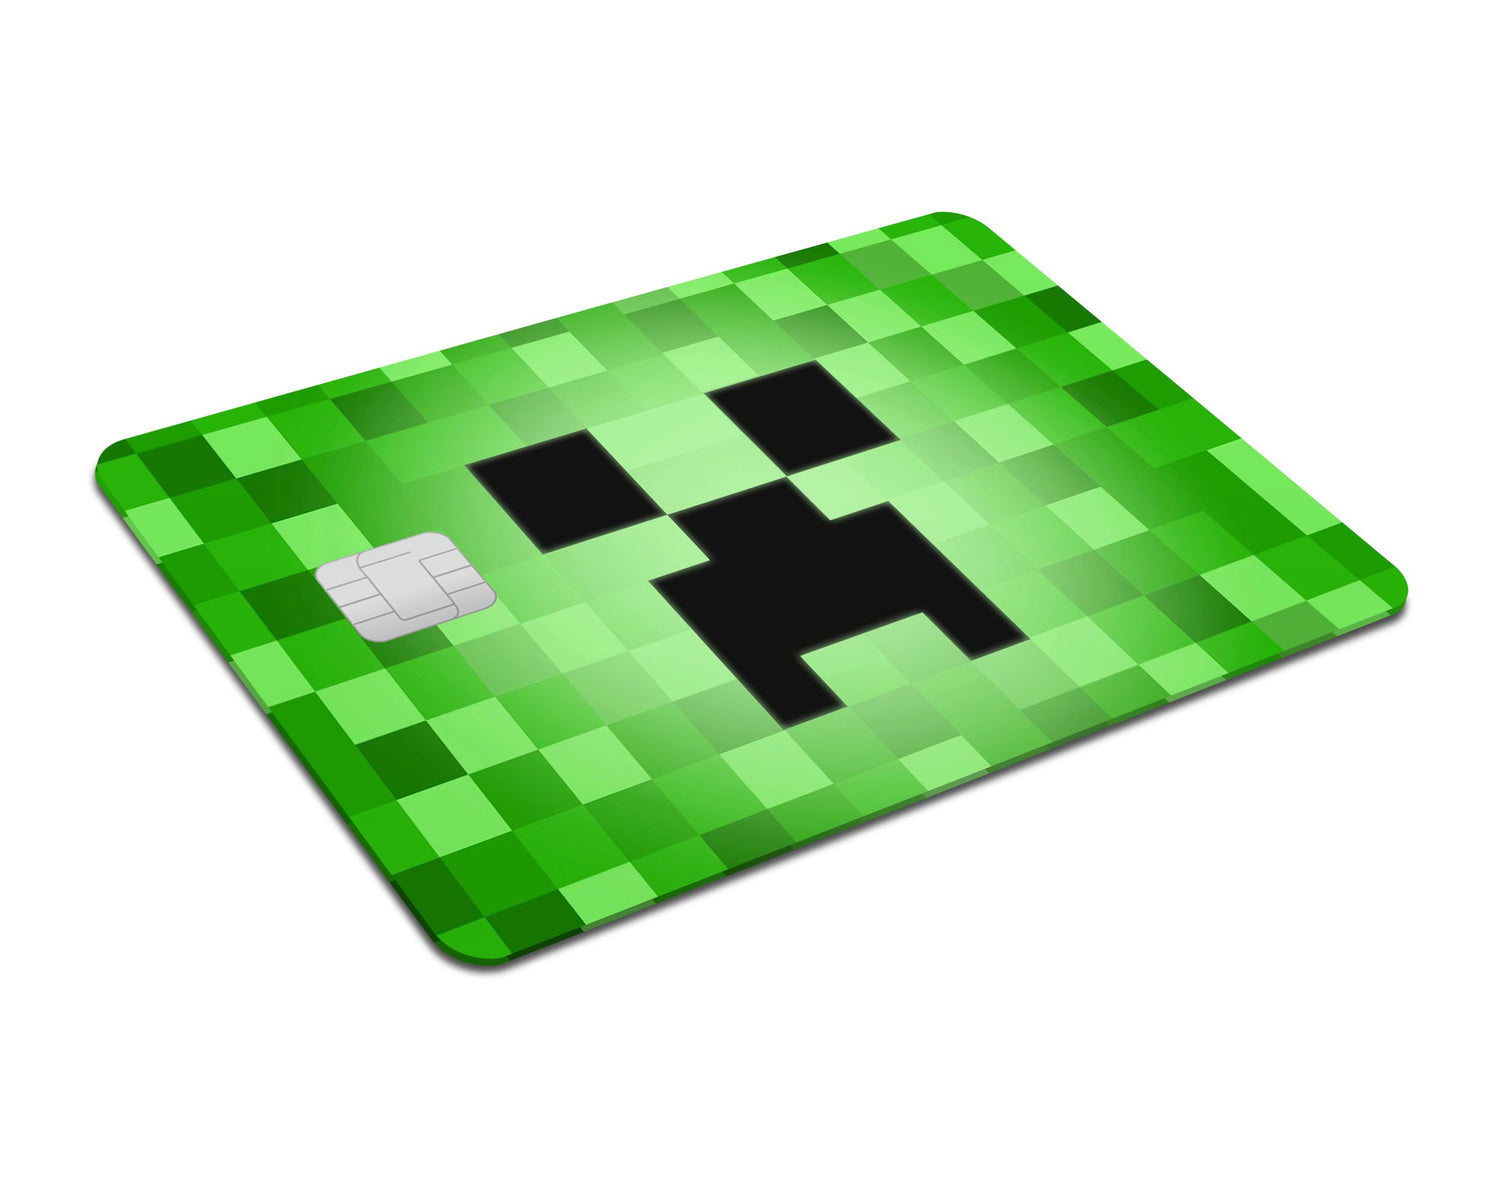 KREA - Search results for real life minecraft character creeper